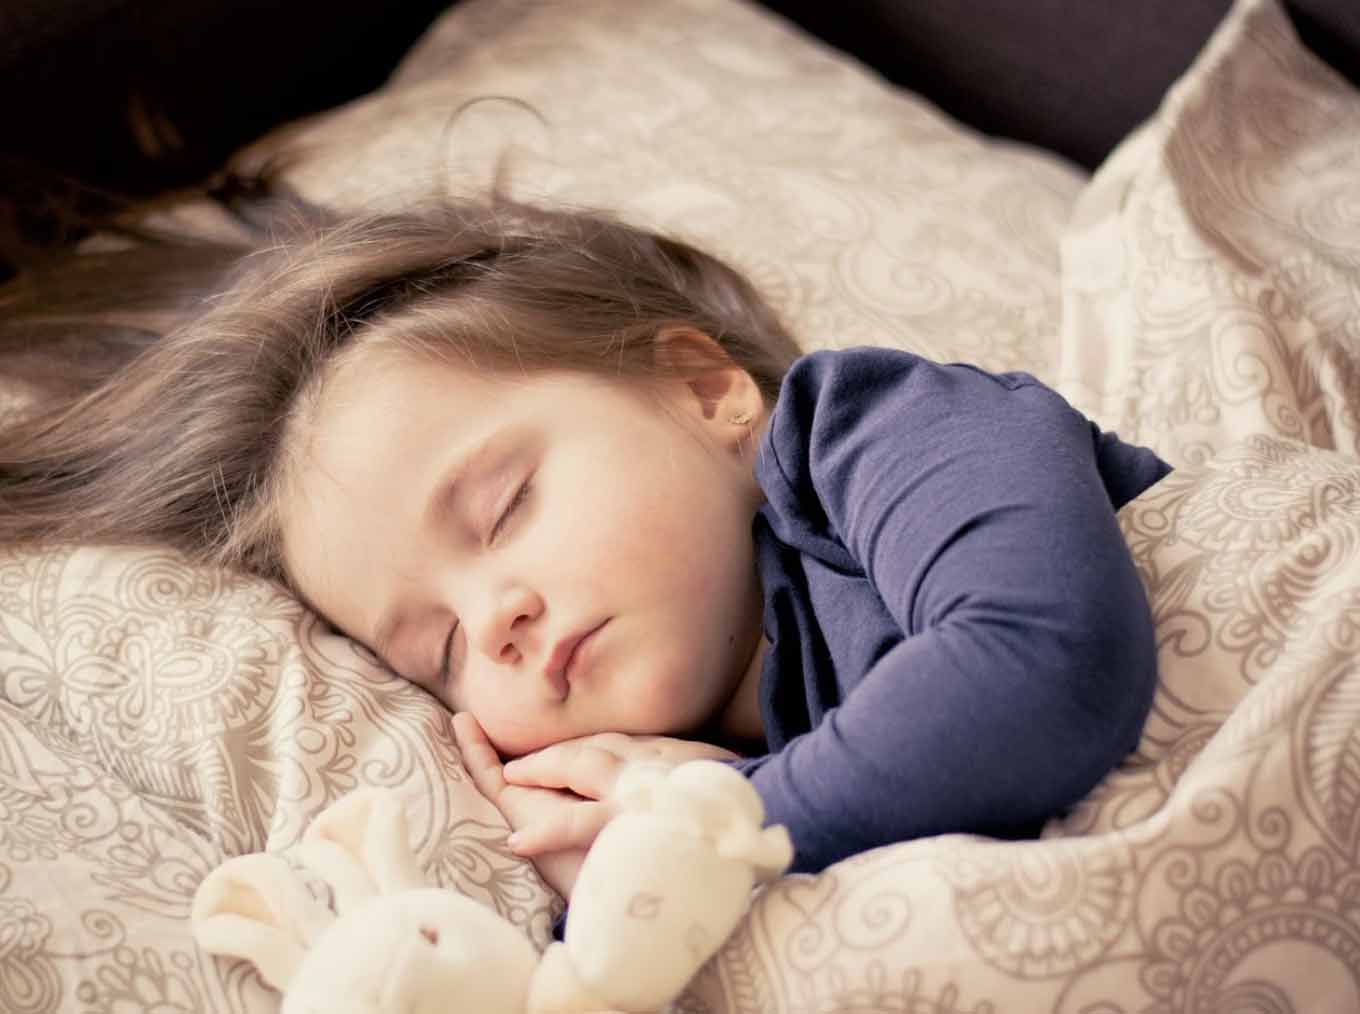 11 Ways You Can Make Your Baby's Sleeping Space as Safe as Possible